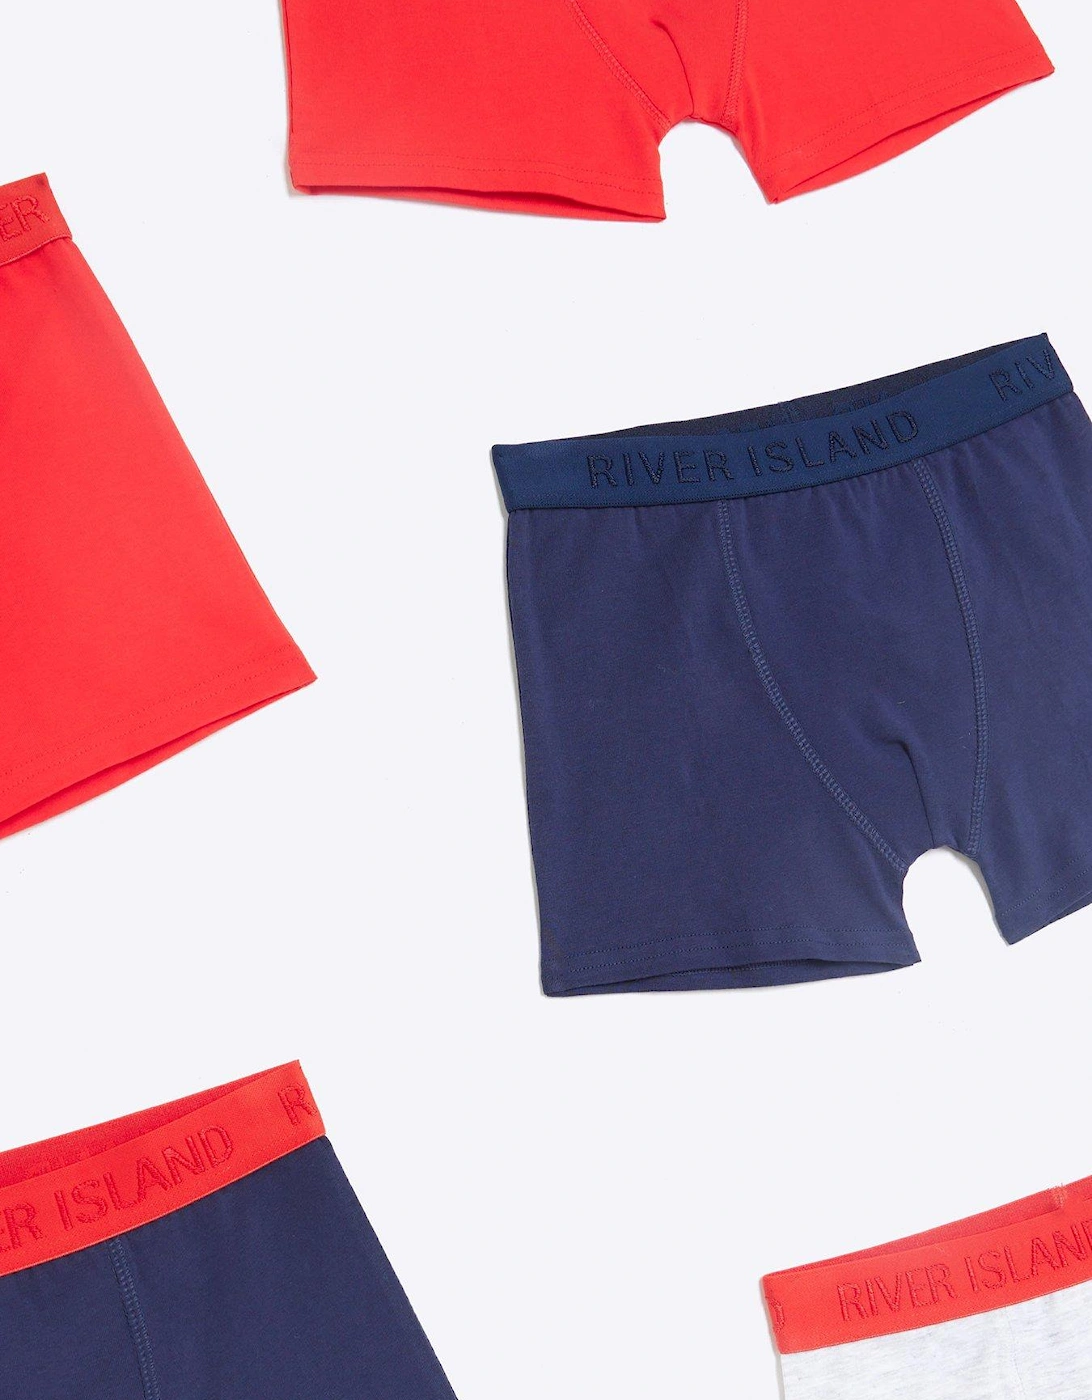 Boys Boxers 5 Pack - Navy